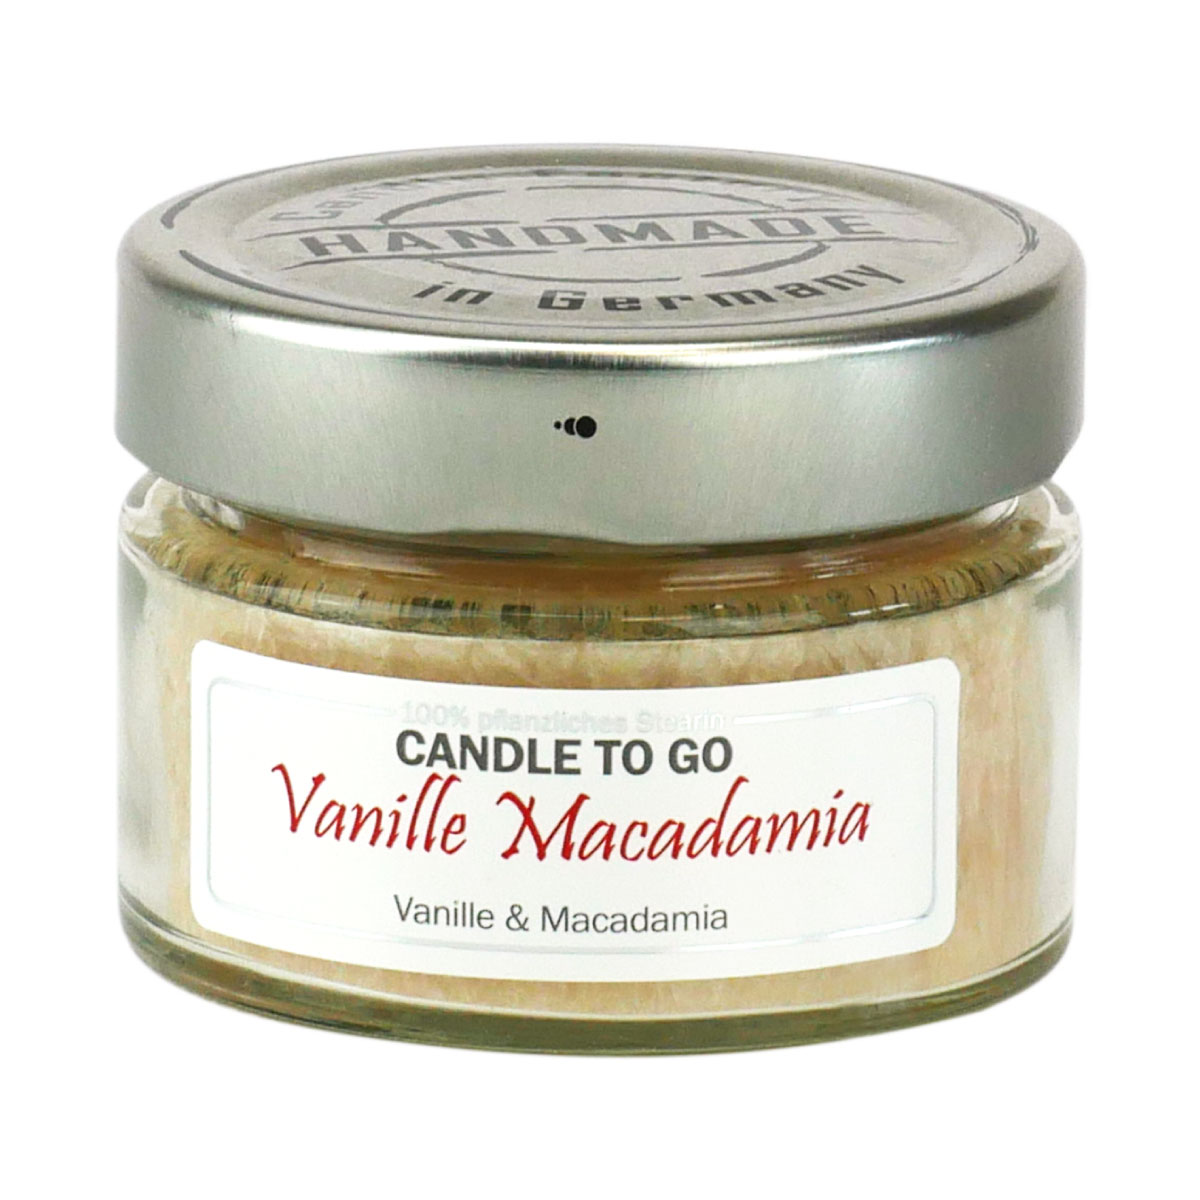 Vanille Macadamia - Candle to Go Duftkerze von Candle Factory